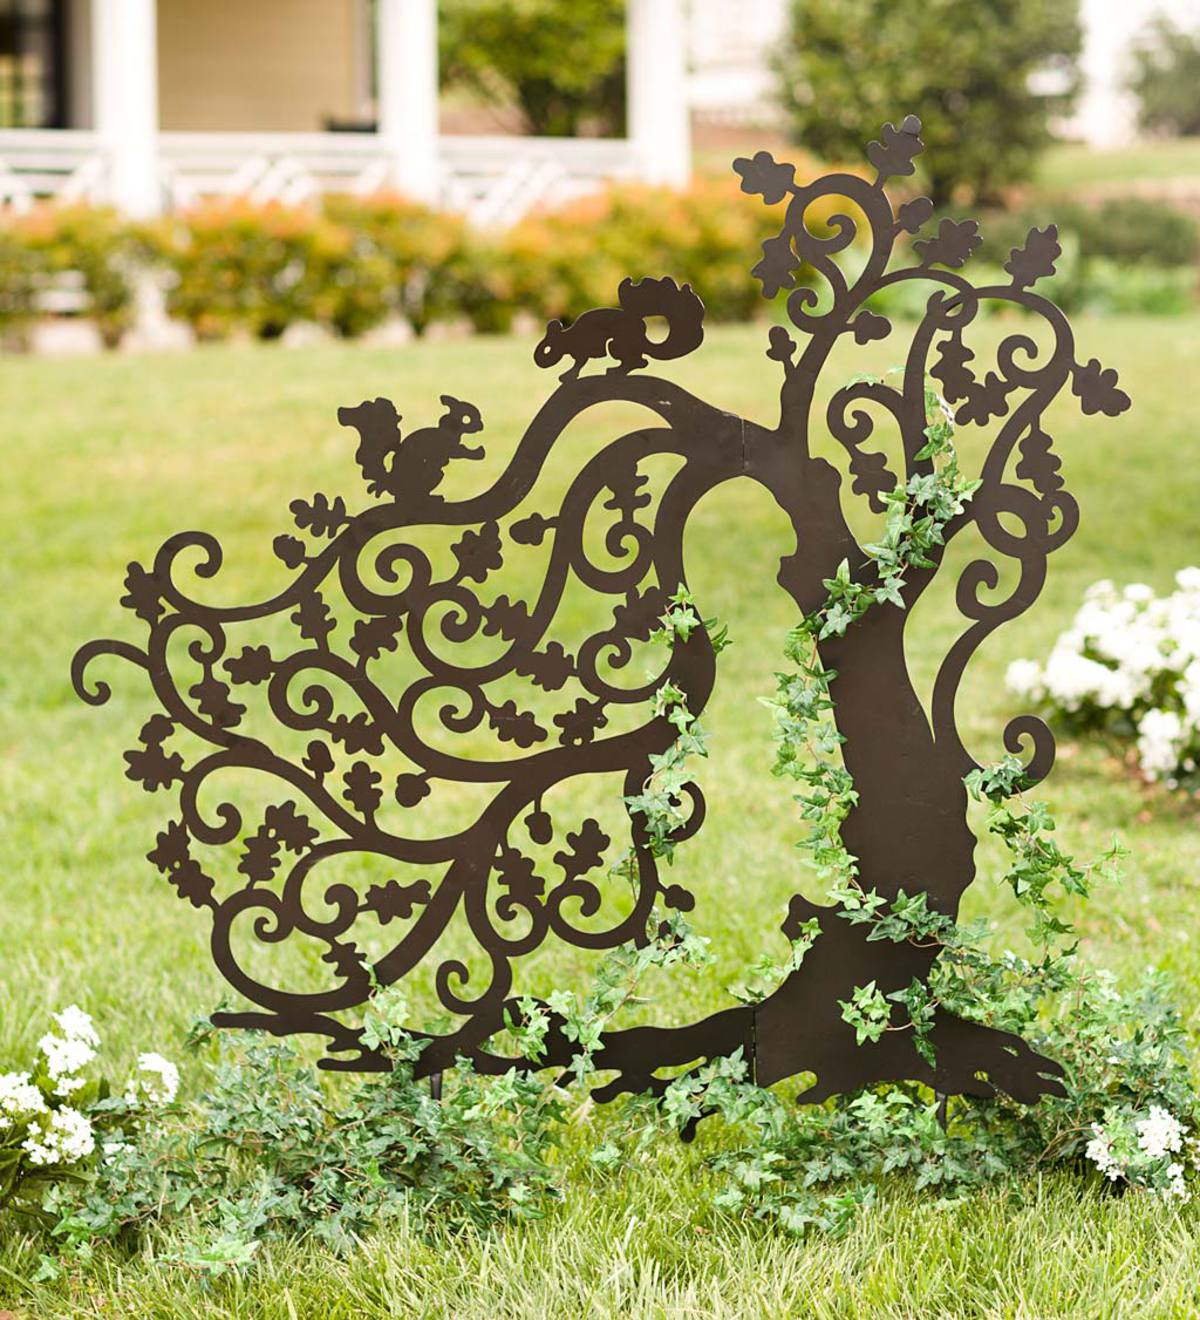 Laser-Cut Metal Twisting Tree with Squirrels Silhouette Garden Stake